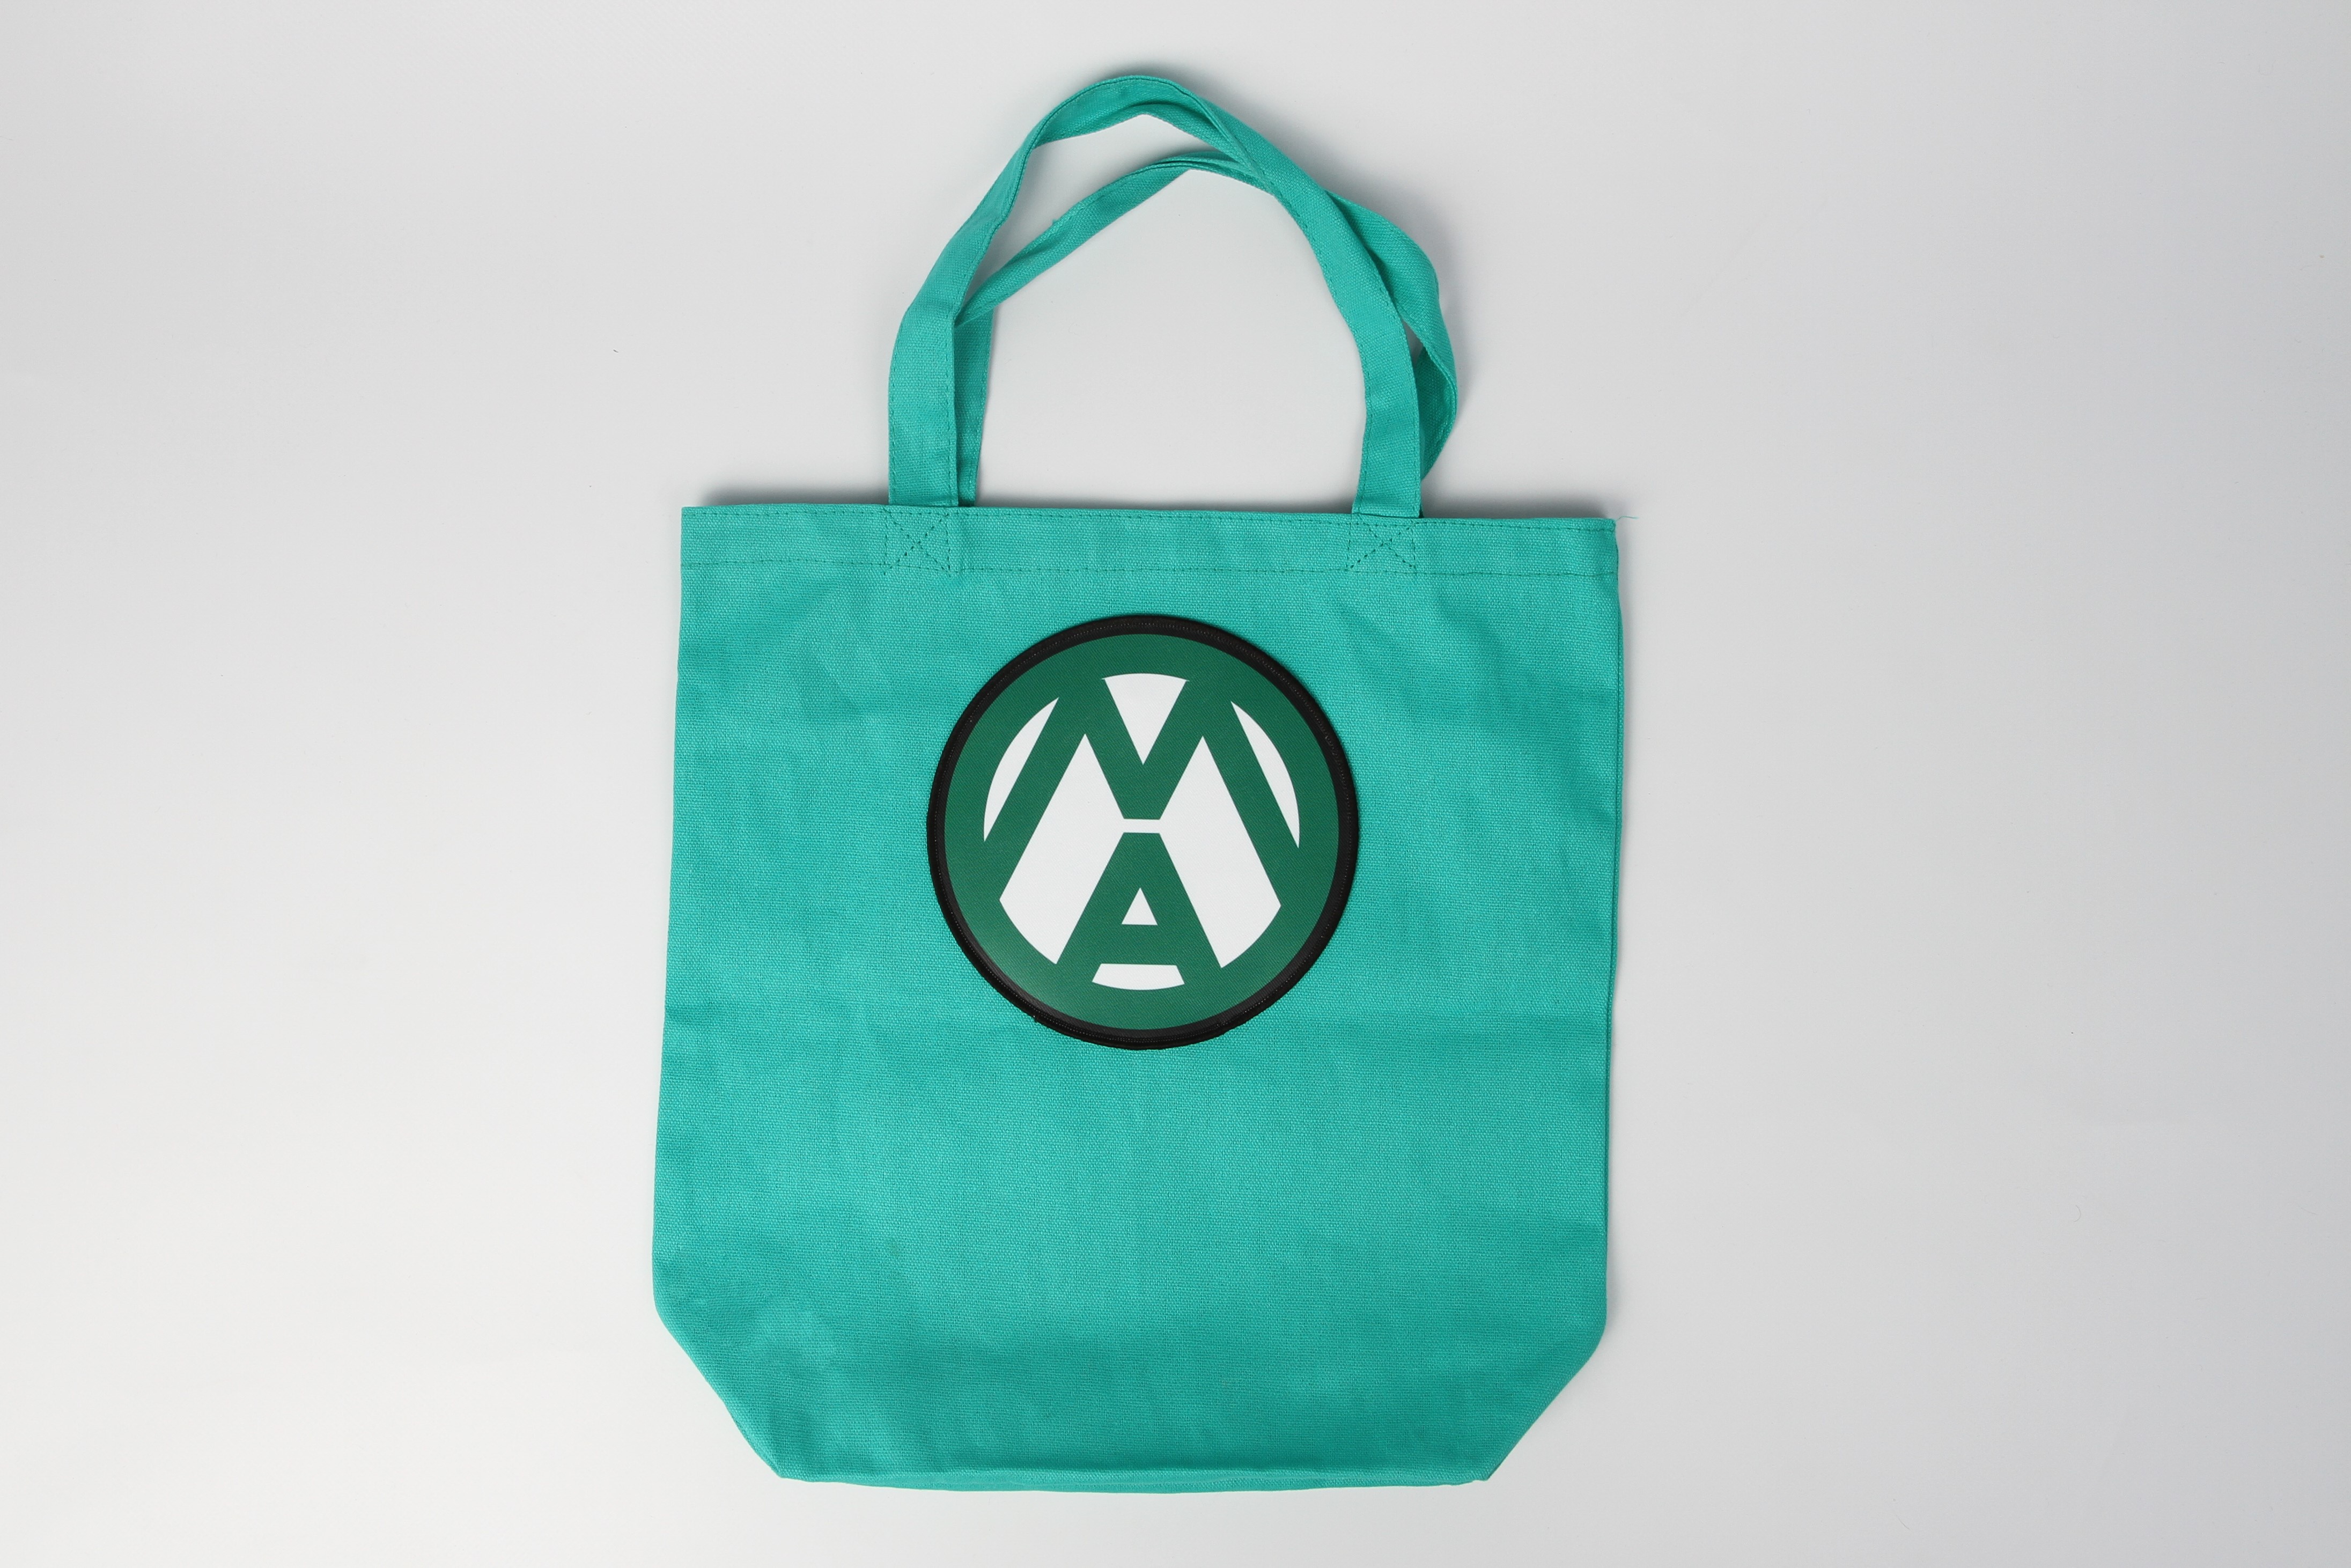 Tote bag with custom logo patch